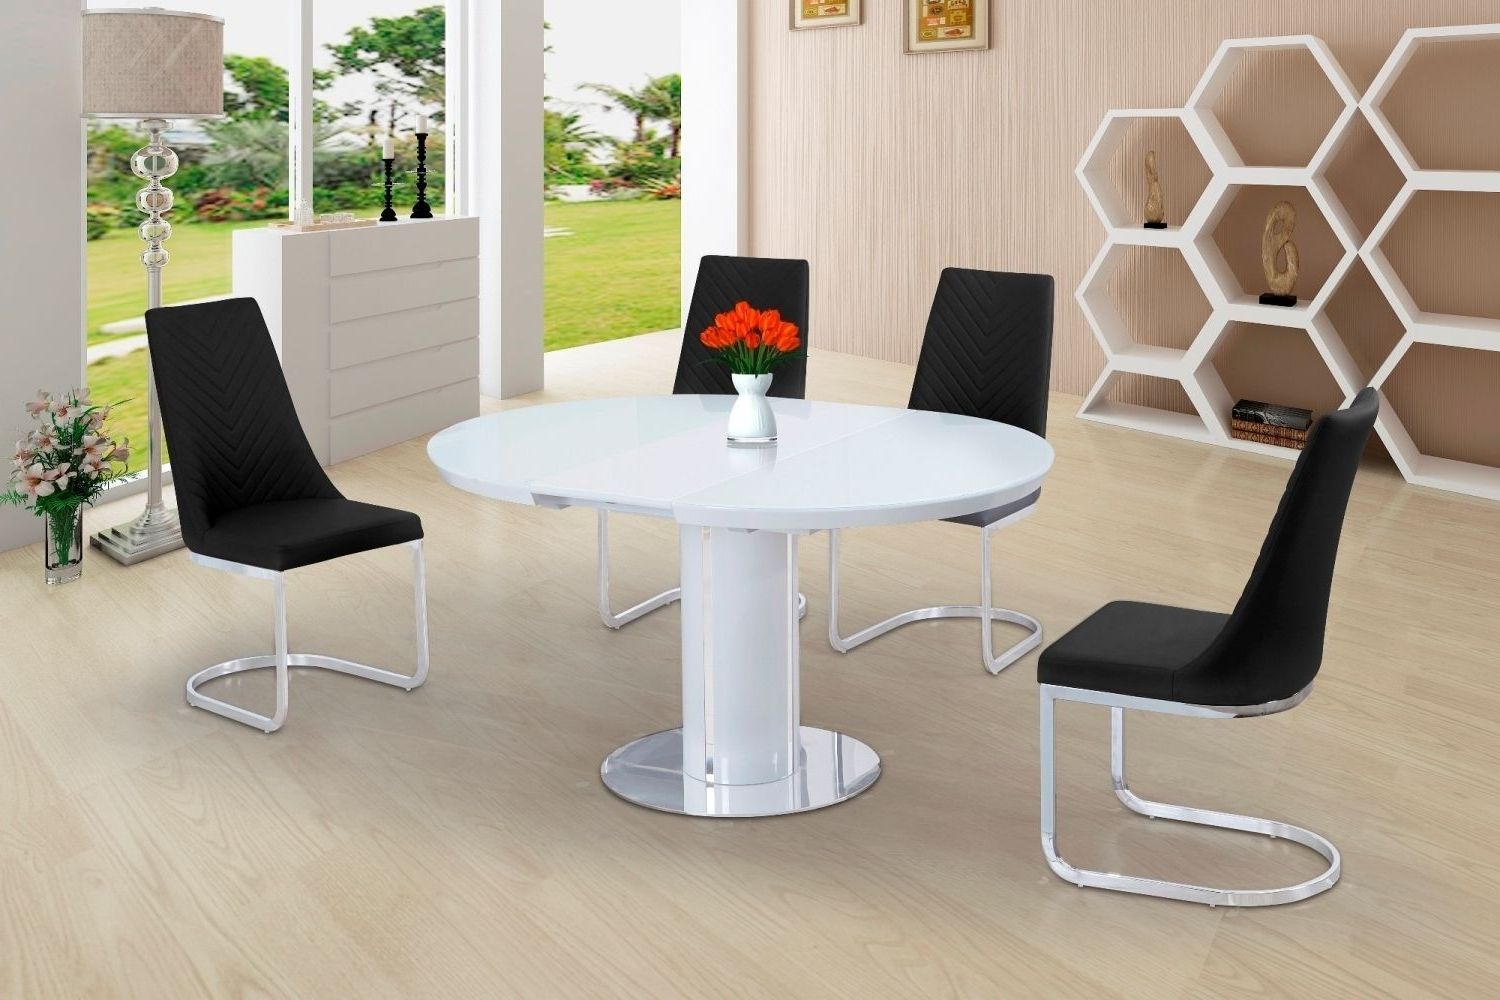 Eclipse Round Oval Gloss & Glass Extending 110 To 145 Cm Dining For Favorite Extended Round Dining Tables (View 17 of 25)